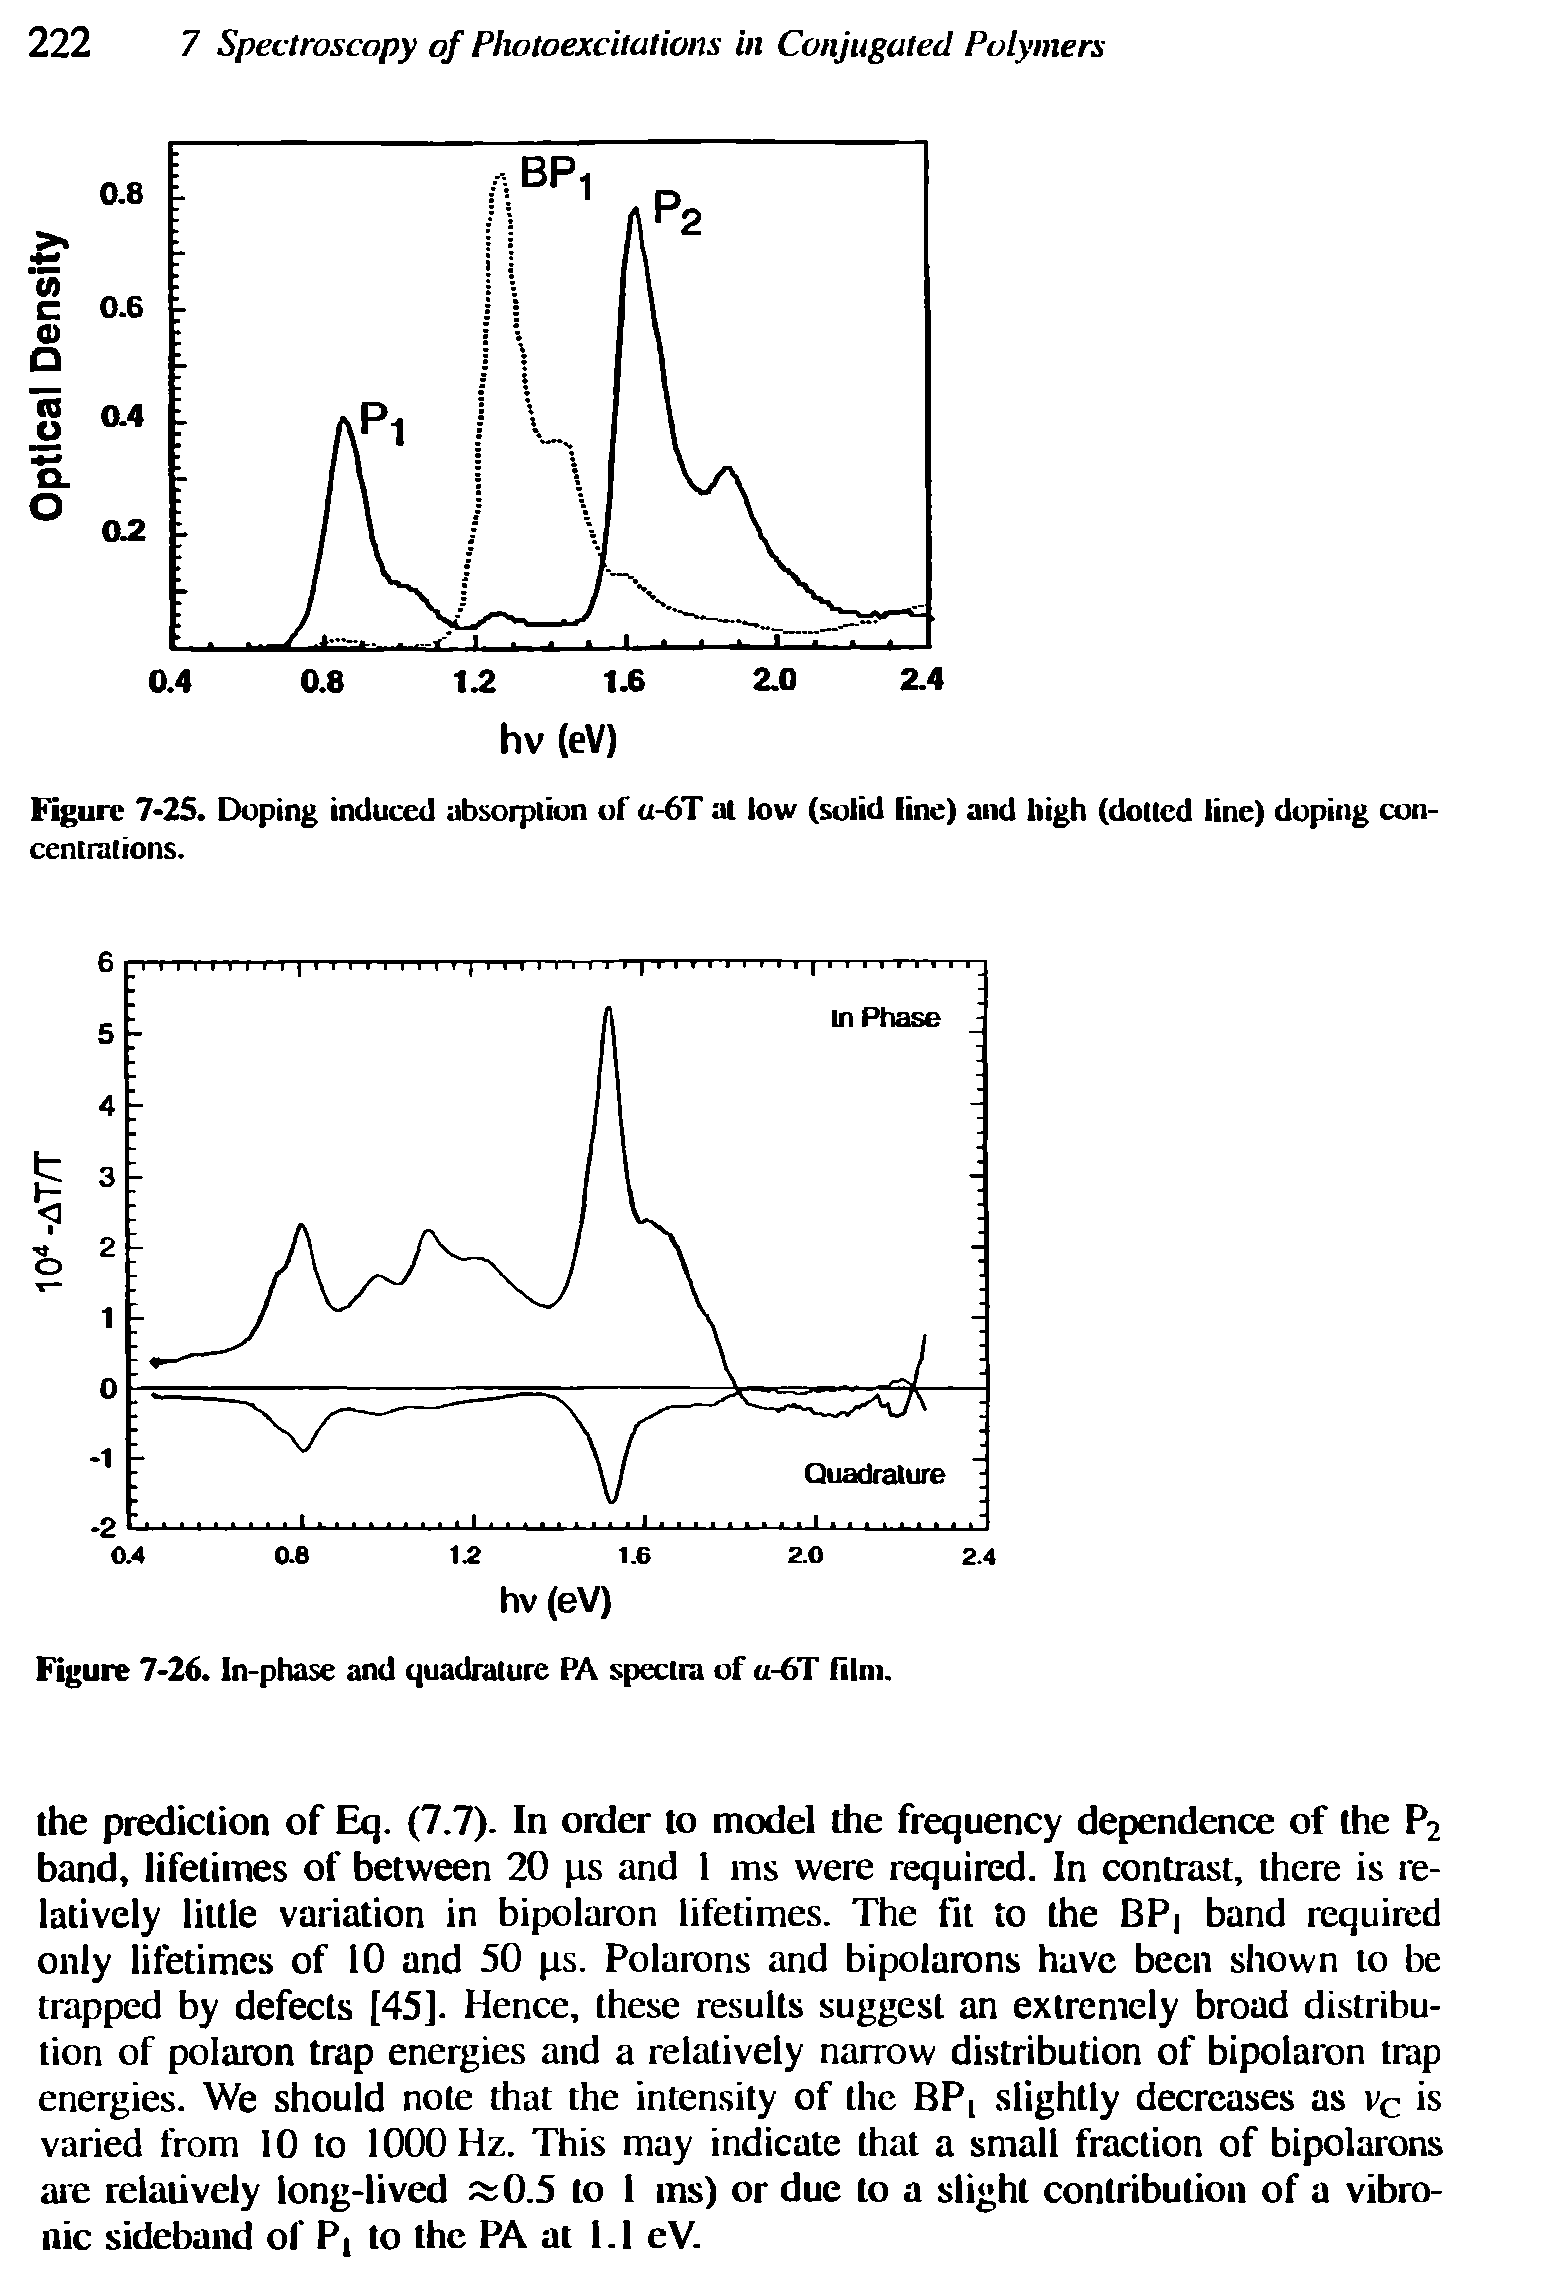 Figure 7-25. Doping induced absorption of u-6T at low (solid line) and high (dolled line) doping concentrations.